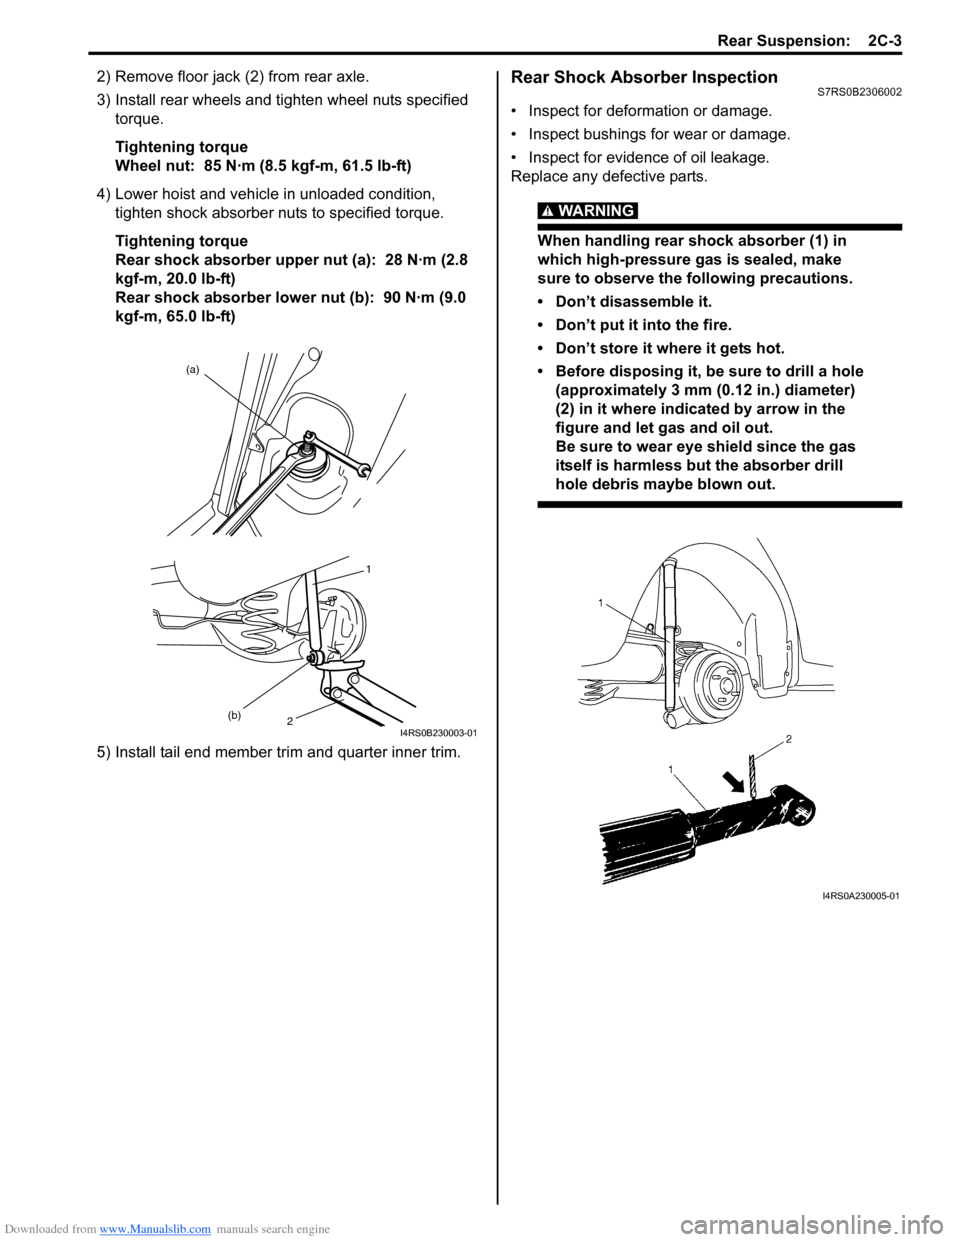 SUZUKI SWIFT 2005 2.G Service Workshop Manual Downloaded from www.Manualslib.com manuals search engine Rear Suspension:  2C-3
2) Remove floor jack (2) from rear axle.
3) Install rear wheels and tighten wheel nuts specified torque.
Tightening torq